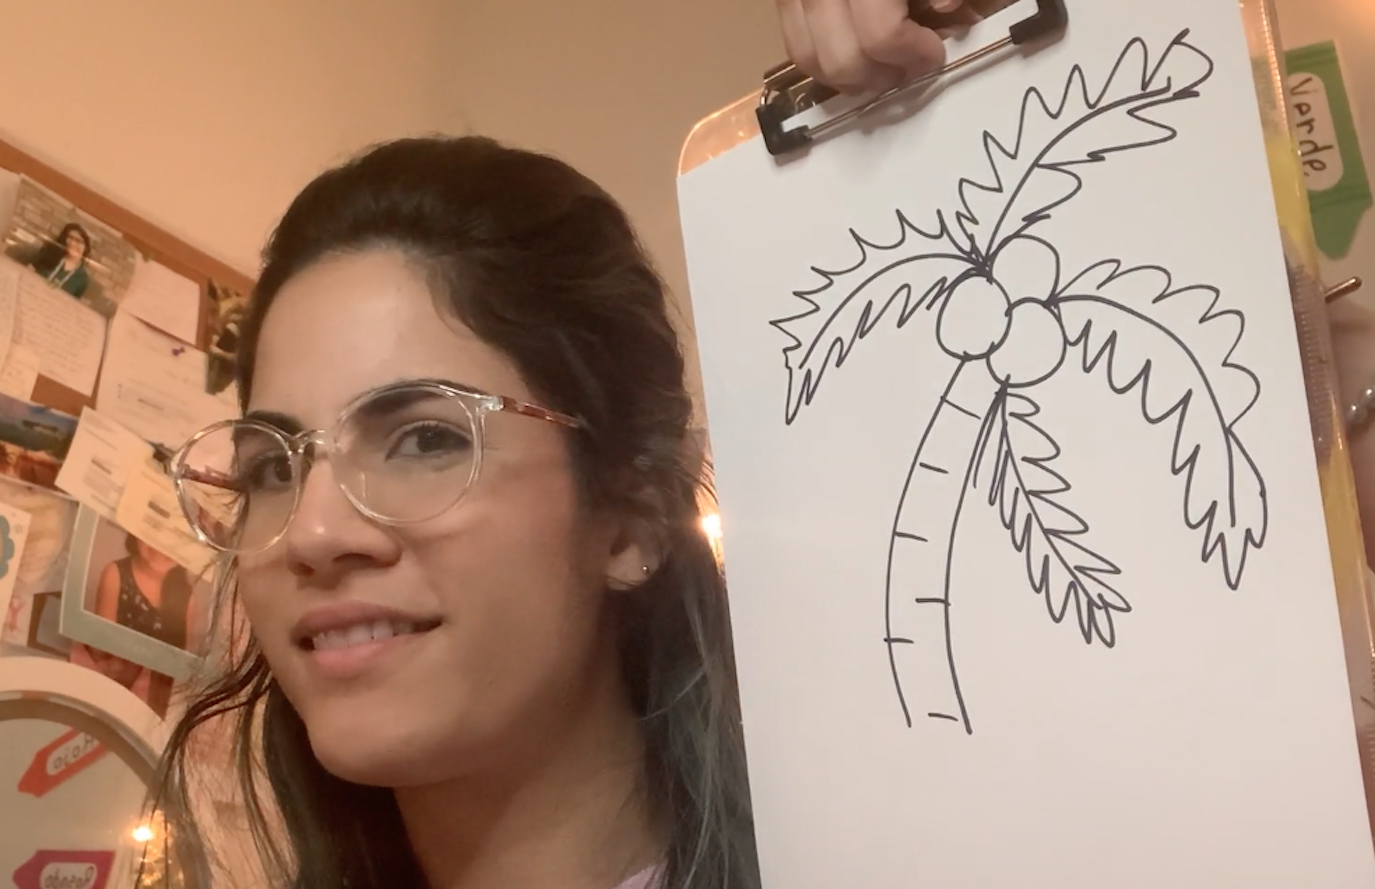 An adult holding up a hand drawn picture of a palm tree.